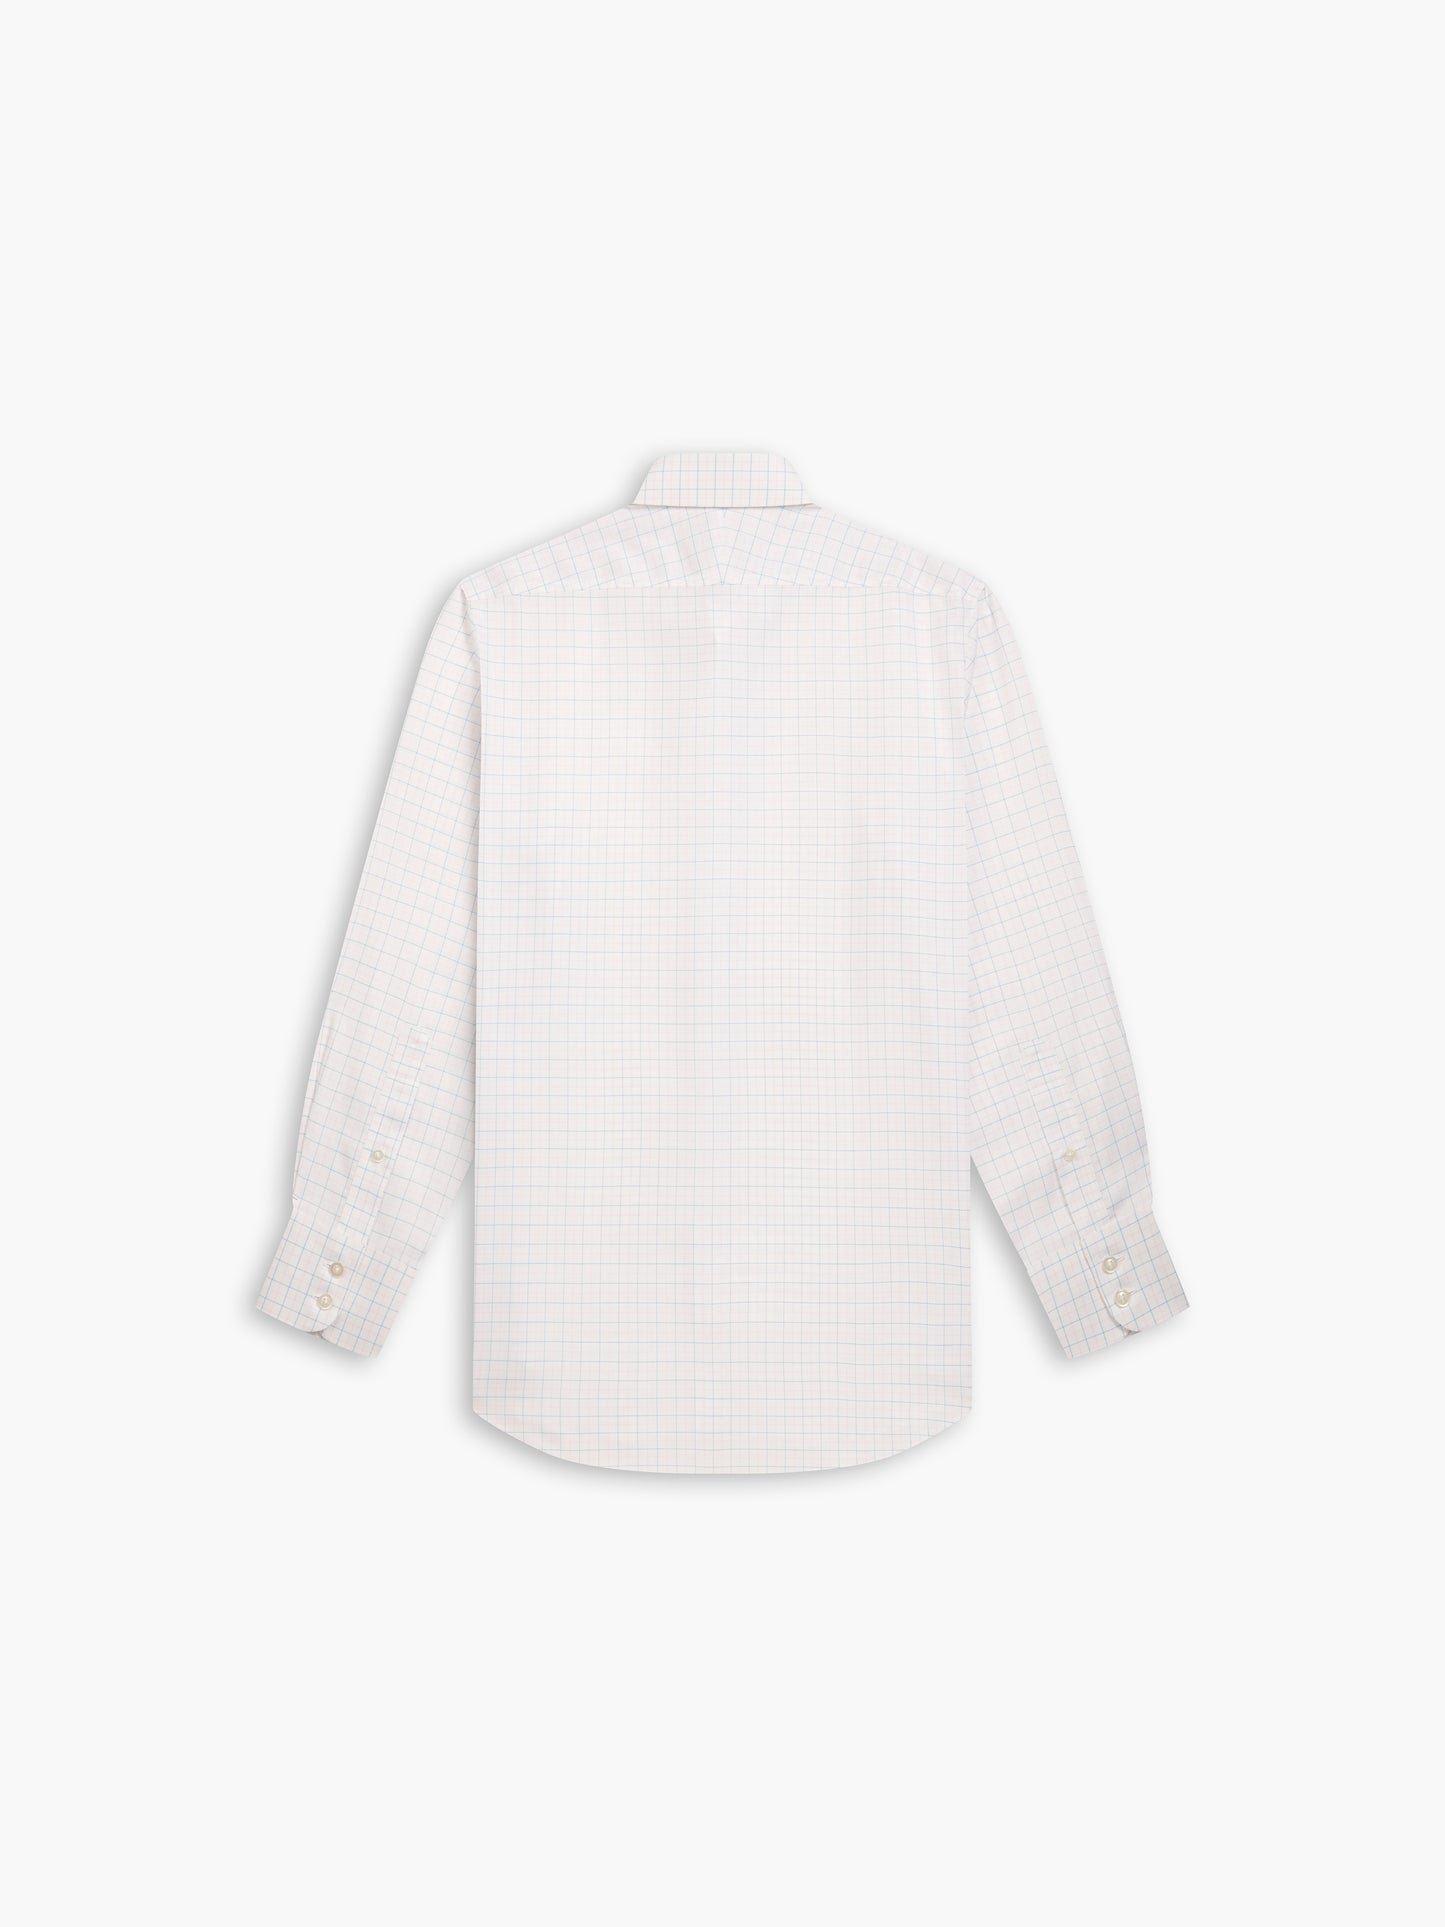 Image 4 of Non-Iron Blue & Pink Double Check Oxford Regular Fit Single Cuff Classic Collar Shirt